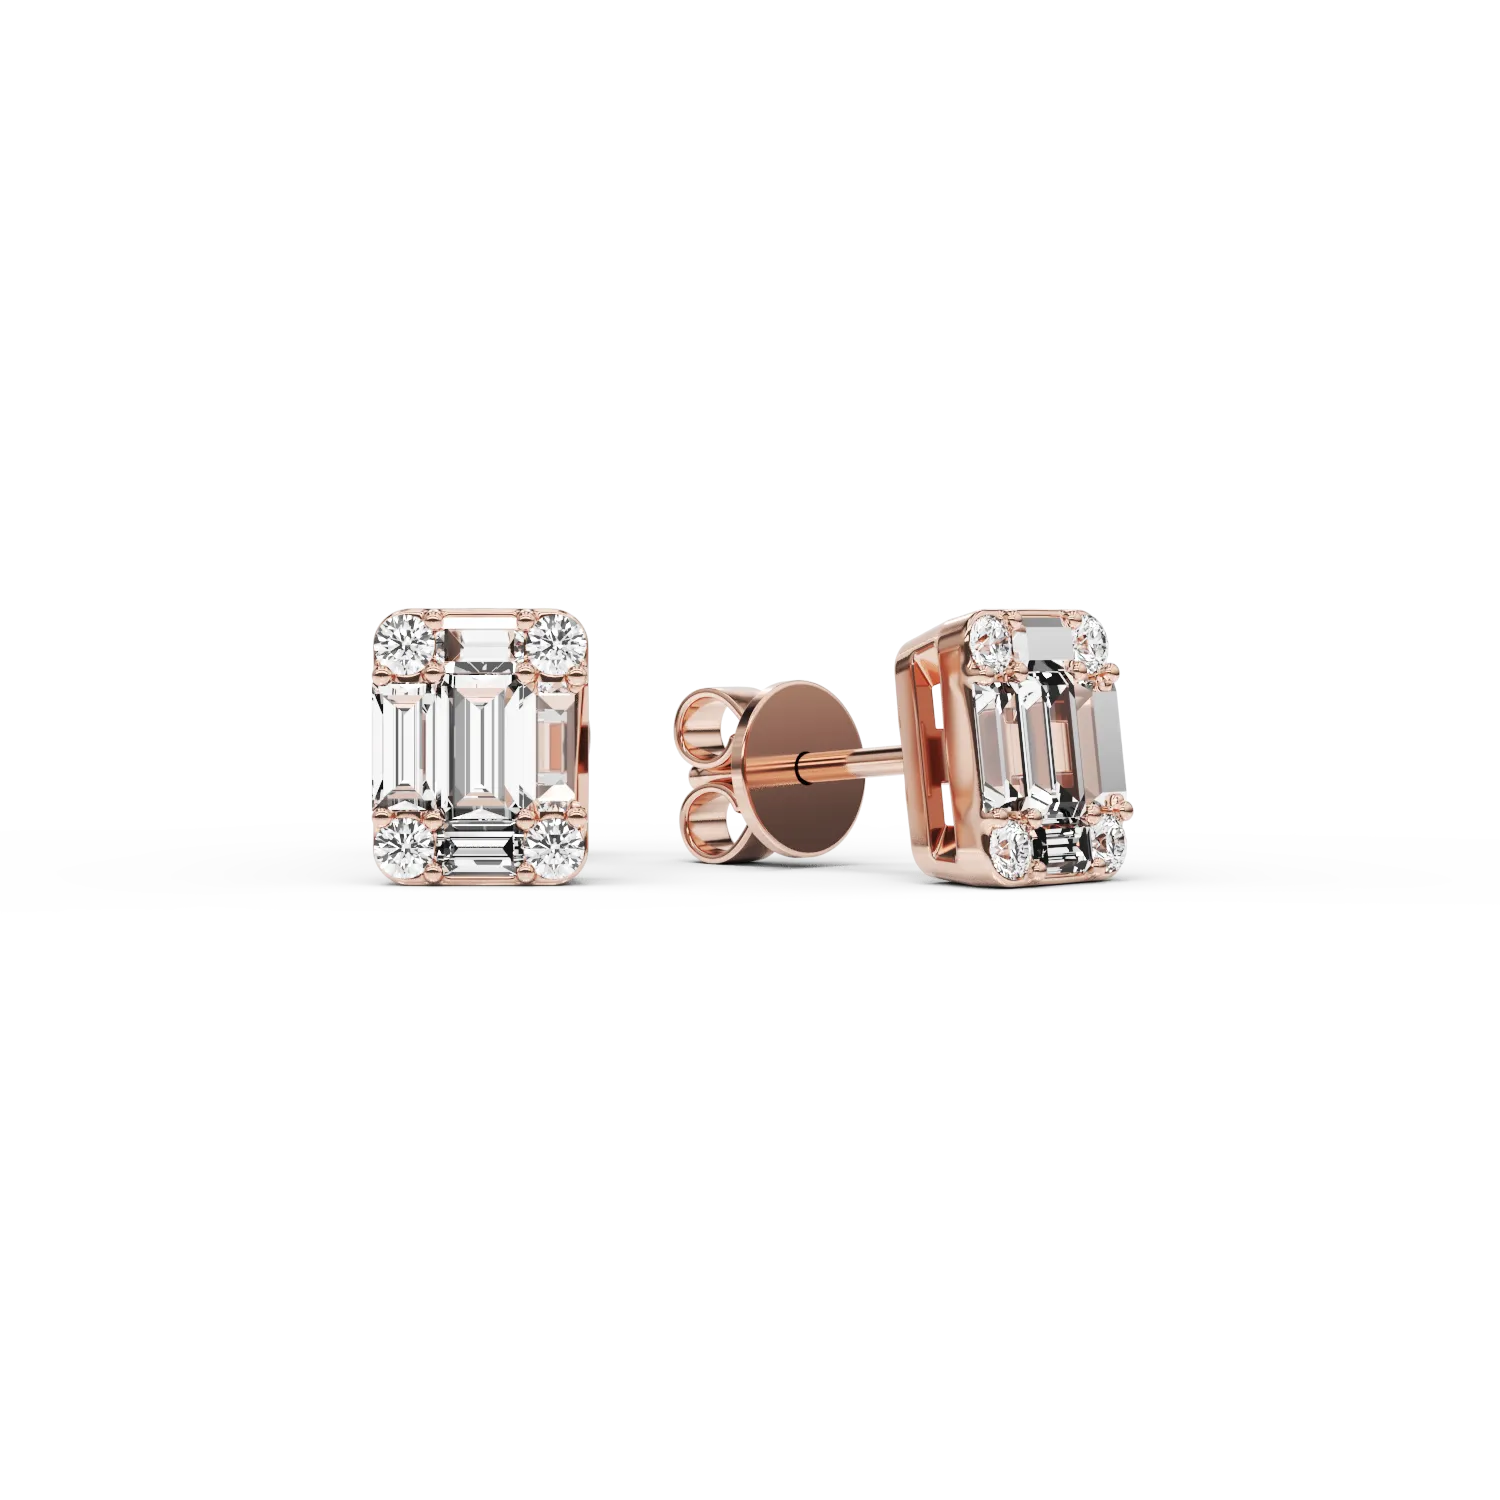 18K rose gold earrings with 0.6ct diamonds